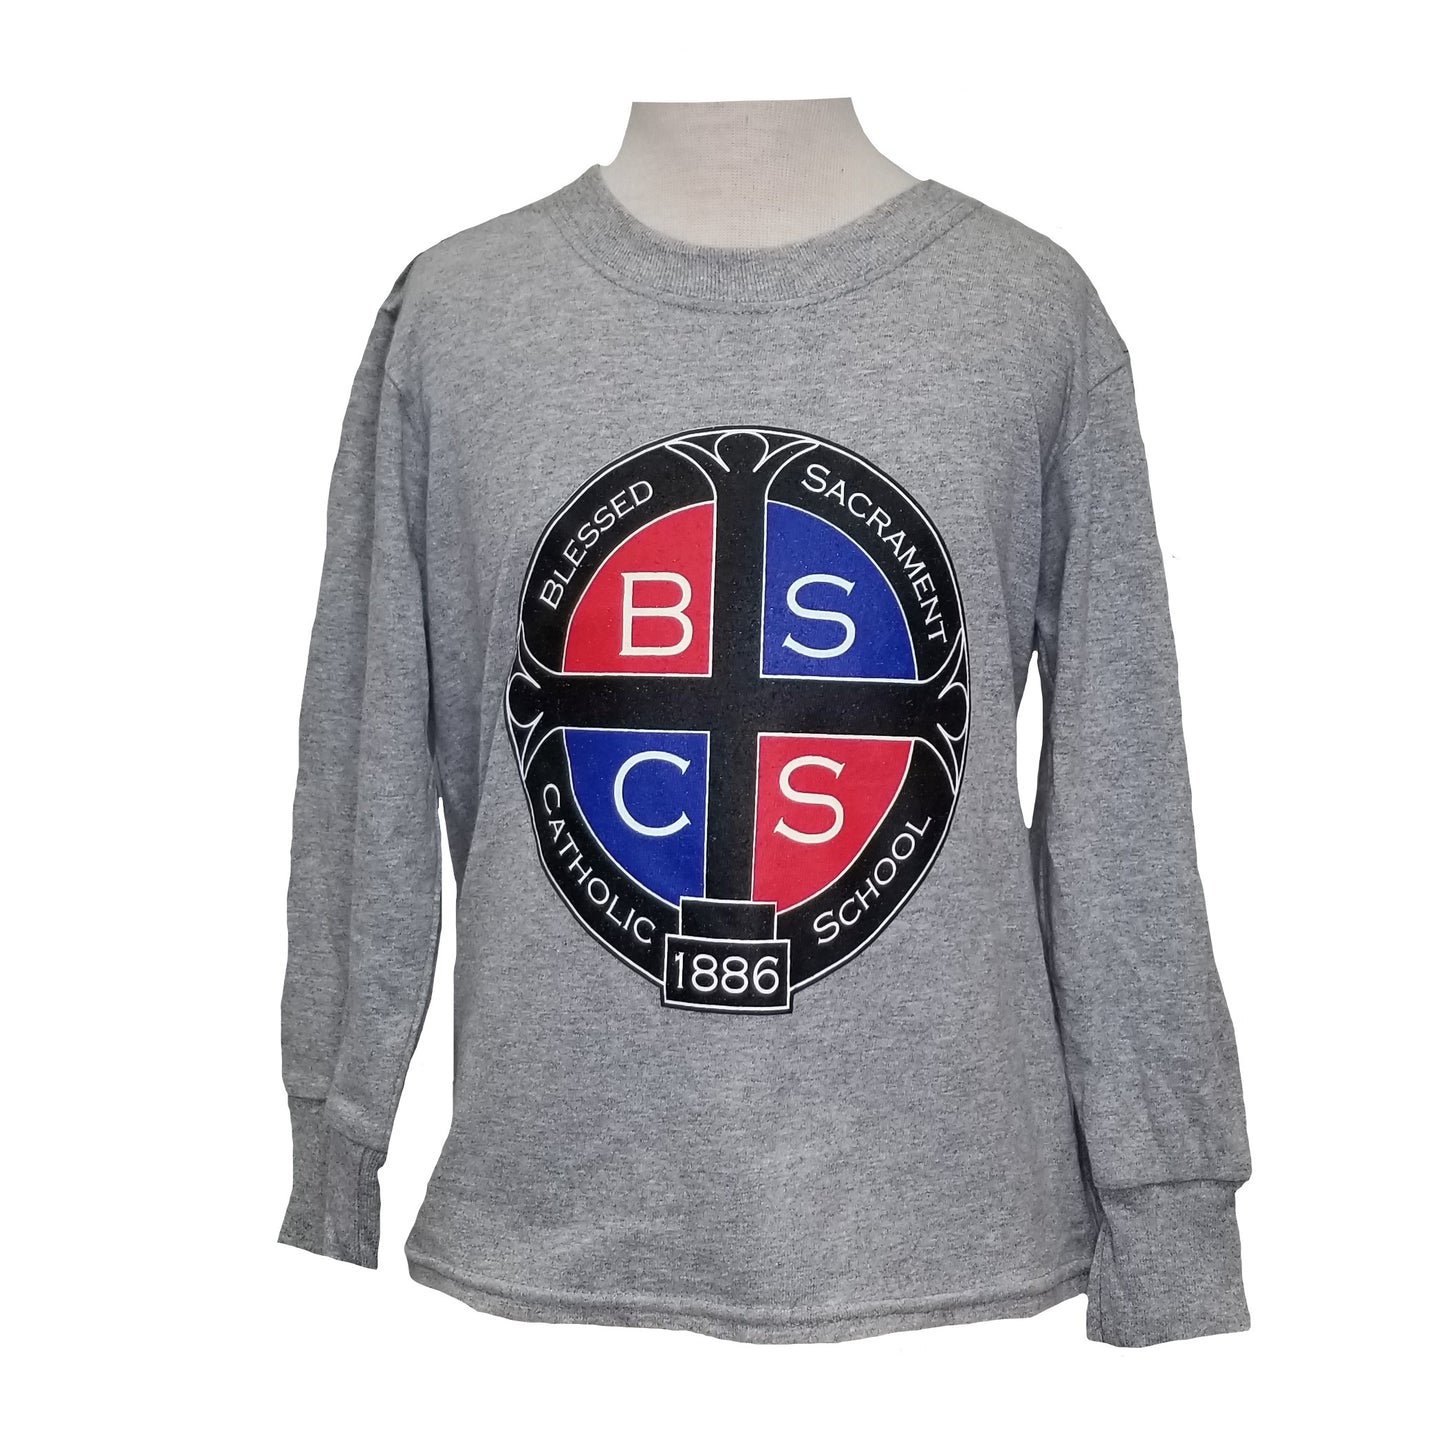 Long Sleeve Adult Tee With Blessed Sacrament Crest